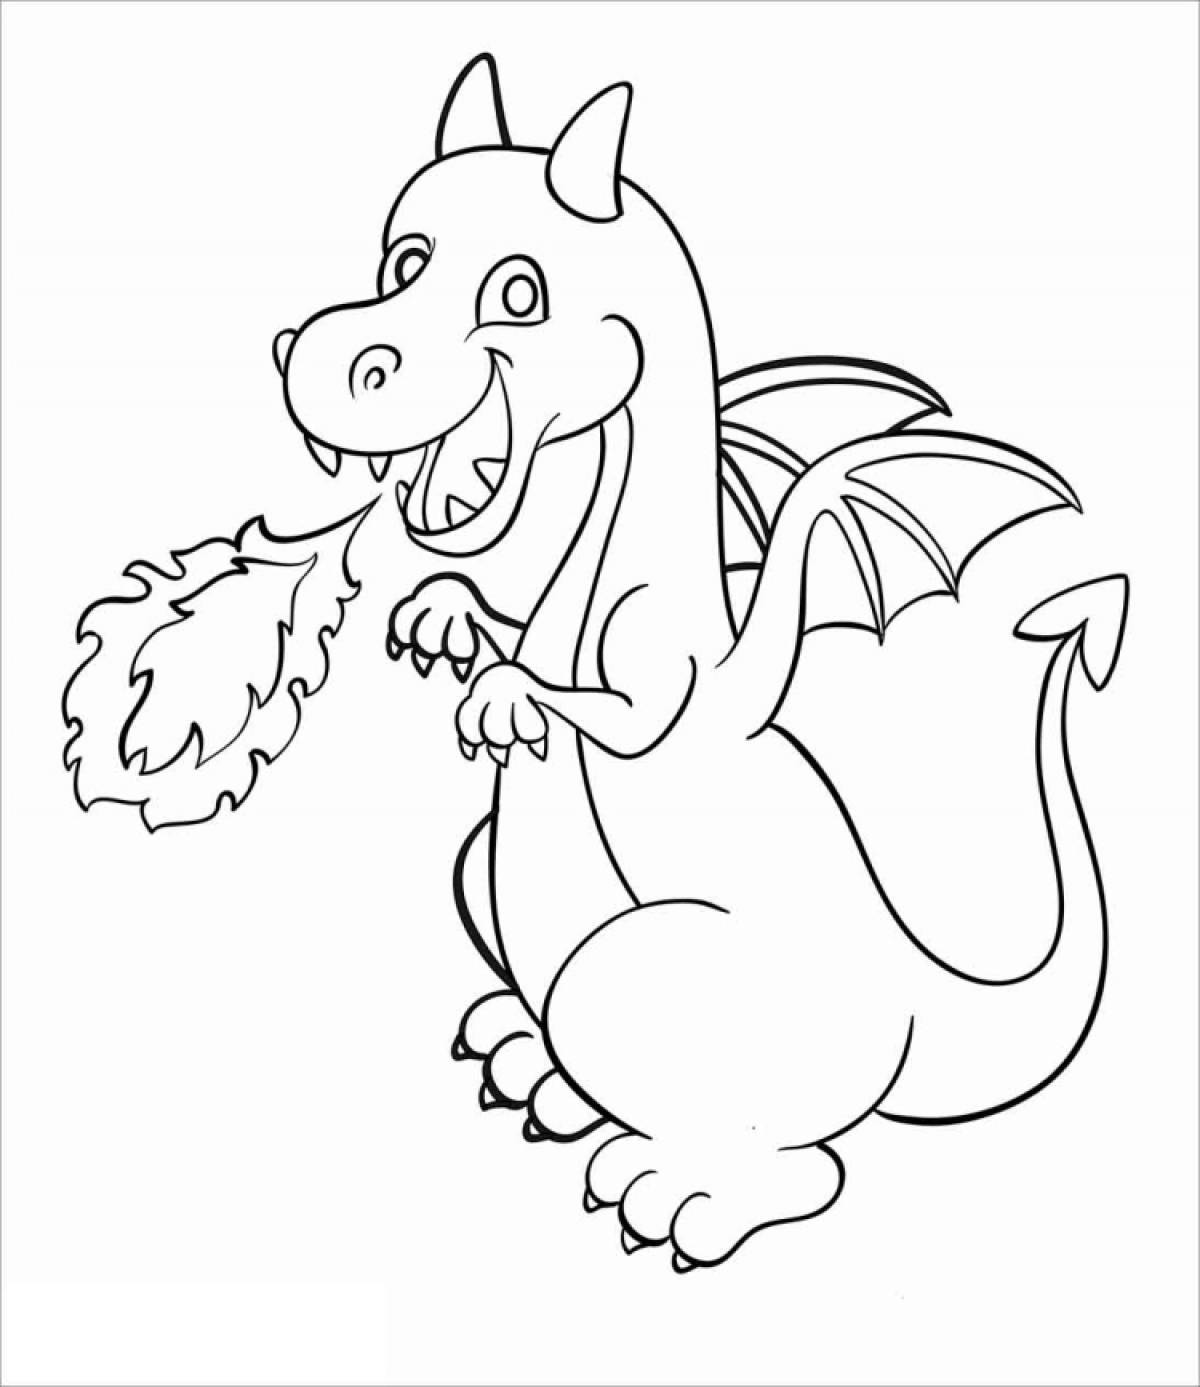 Amazing dragon coloring pages for kids